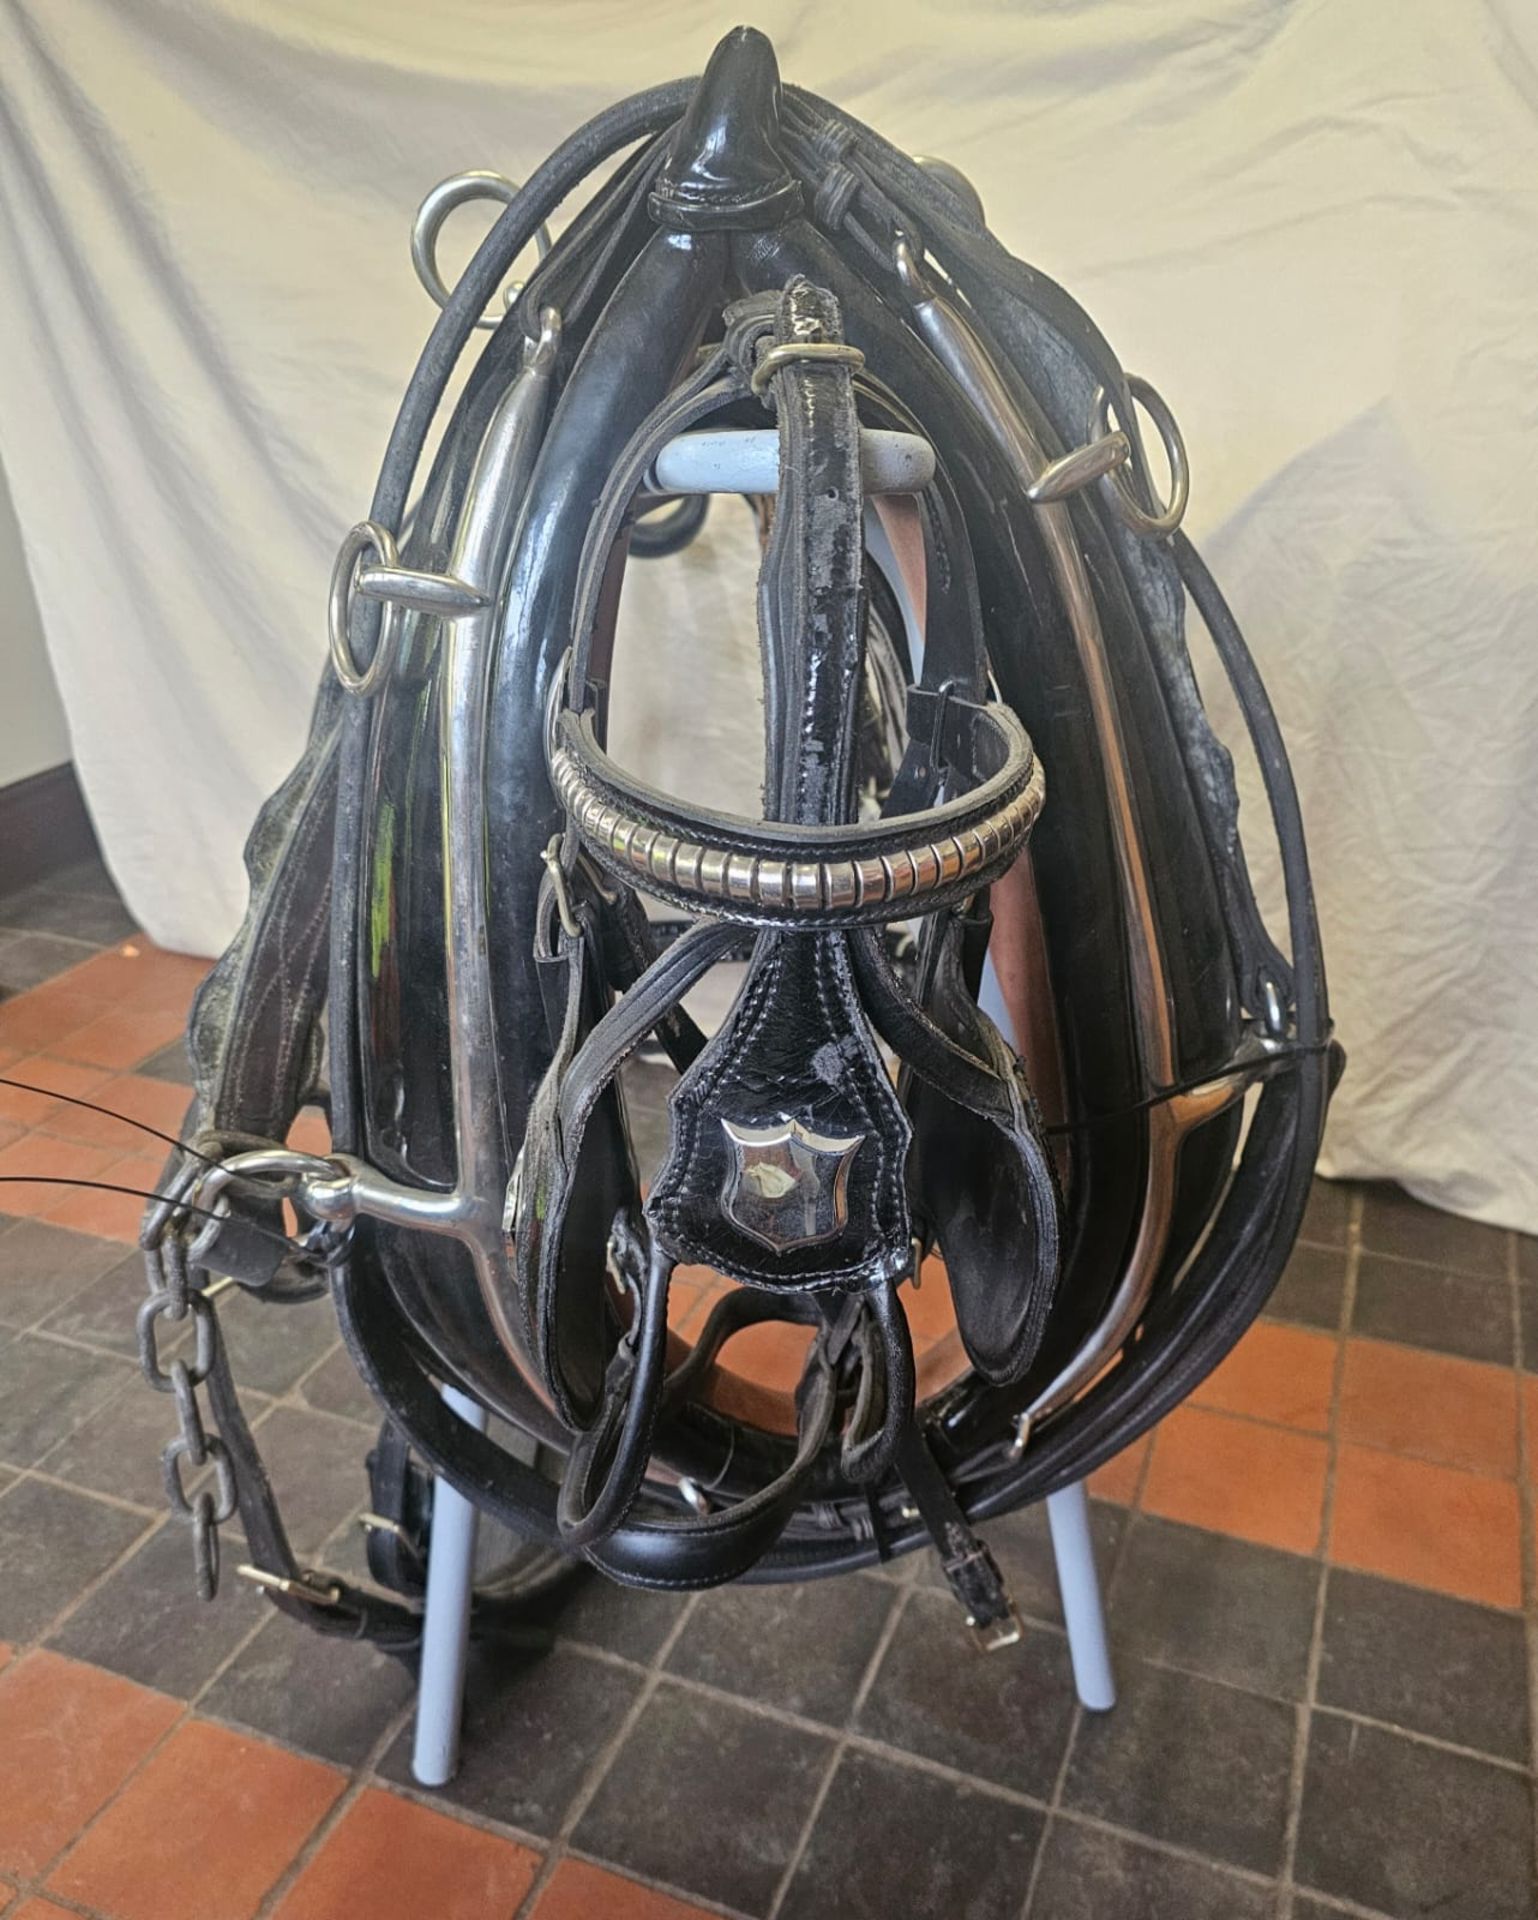 Set of new English patent trade harness with 22 inch full collar, 7-inch pad & nickel buckles. - Image 3 of 3